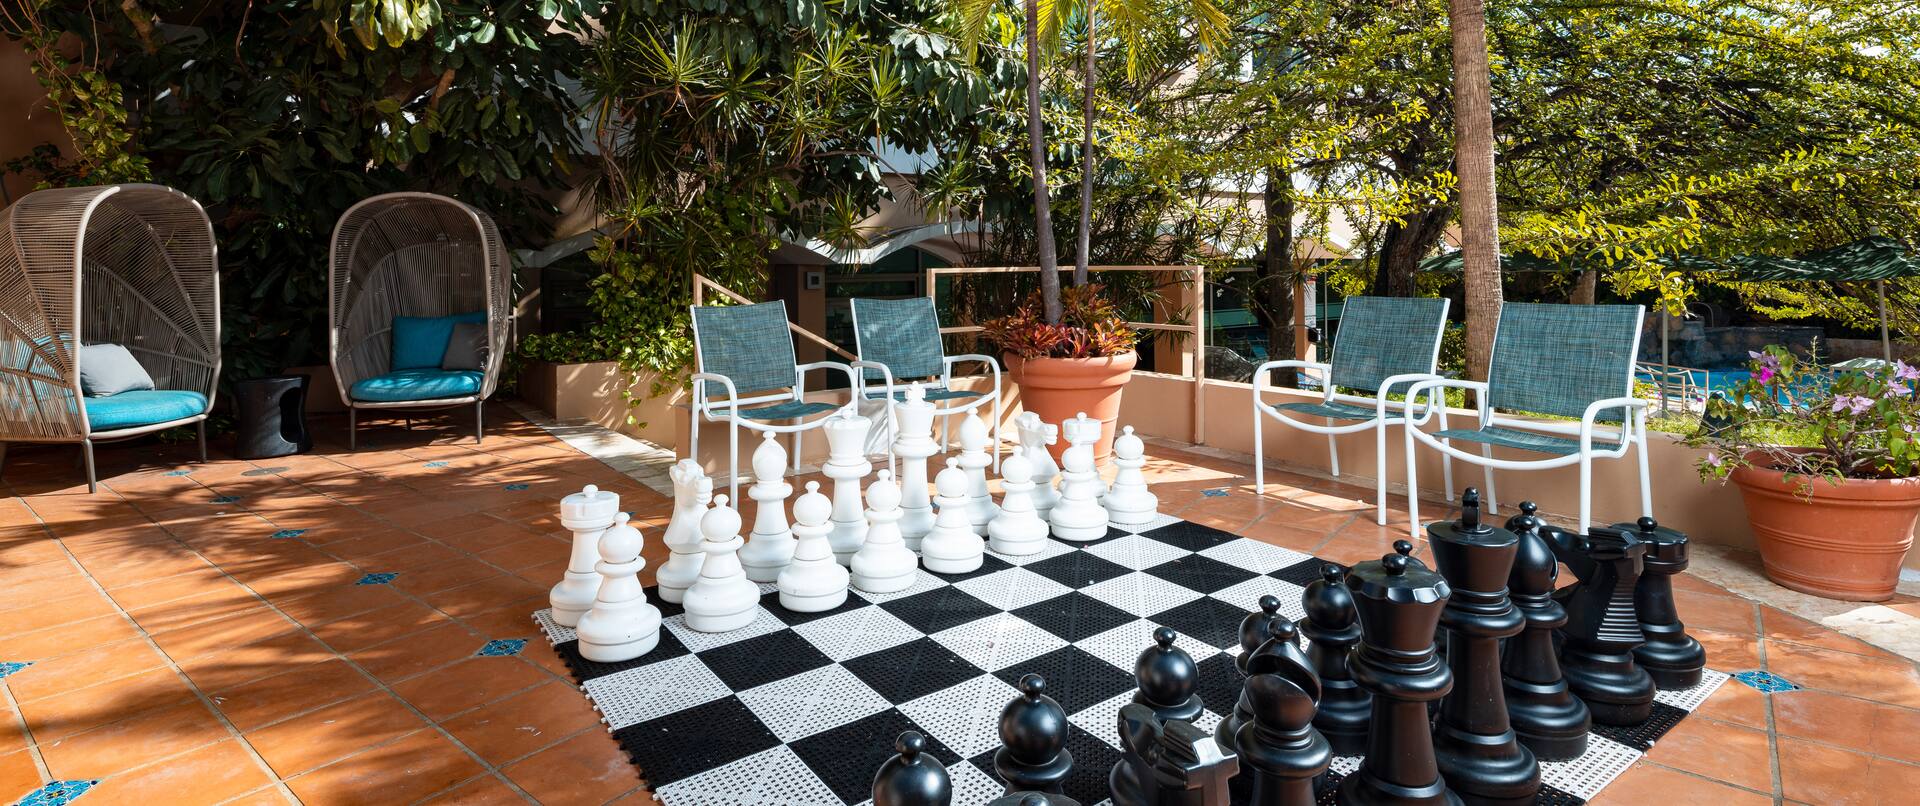 Outdoor Life Size Chess Set